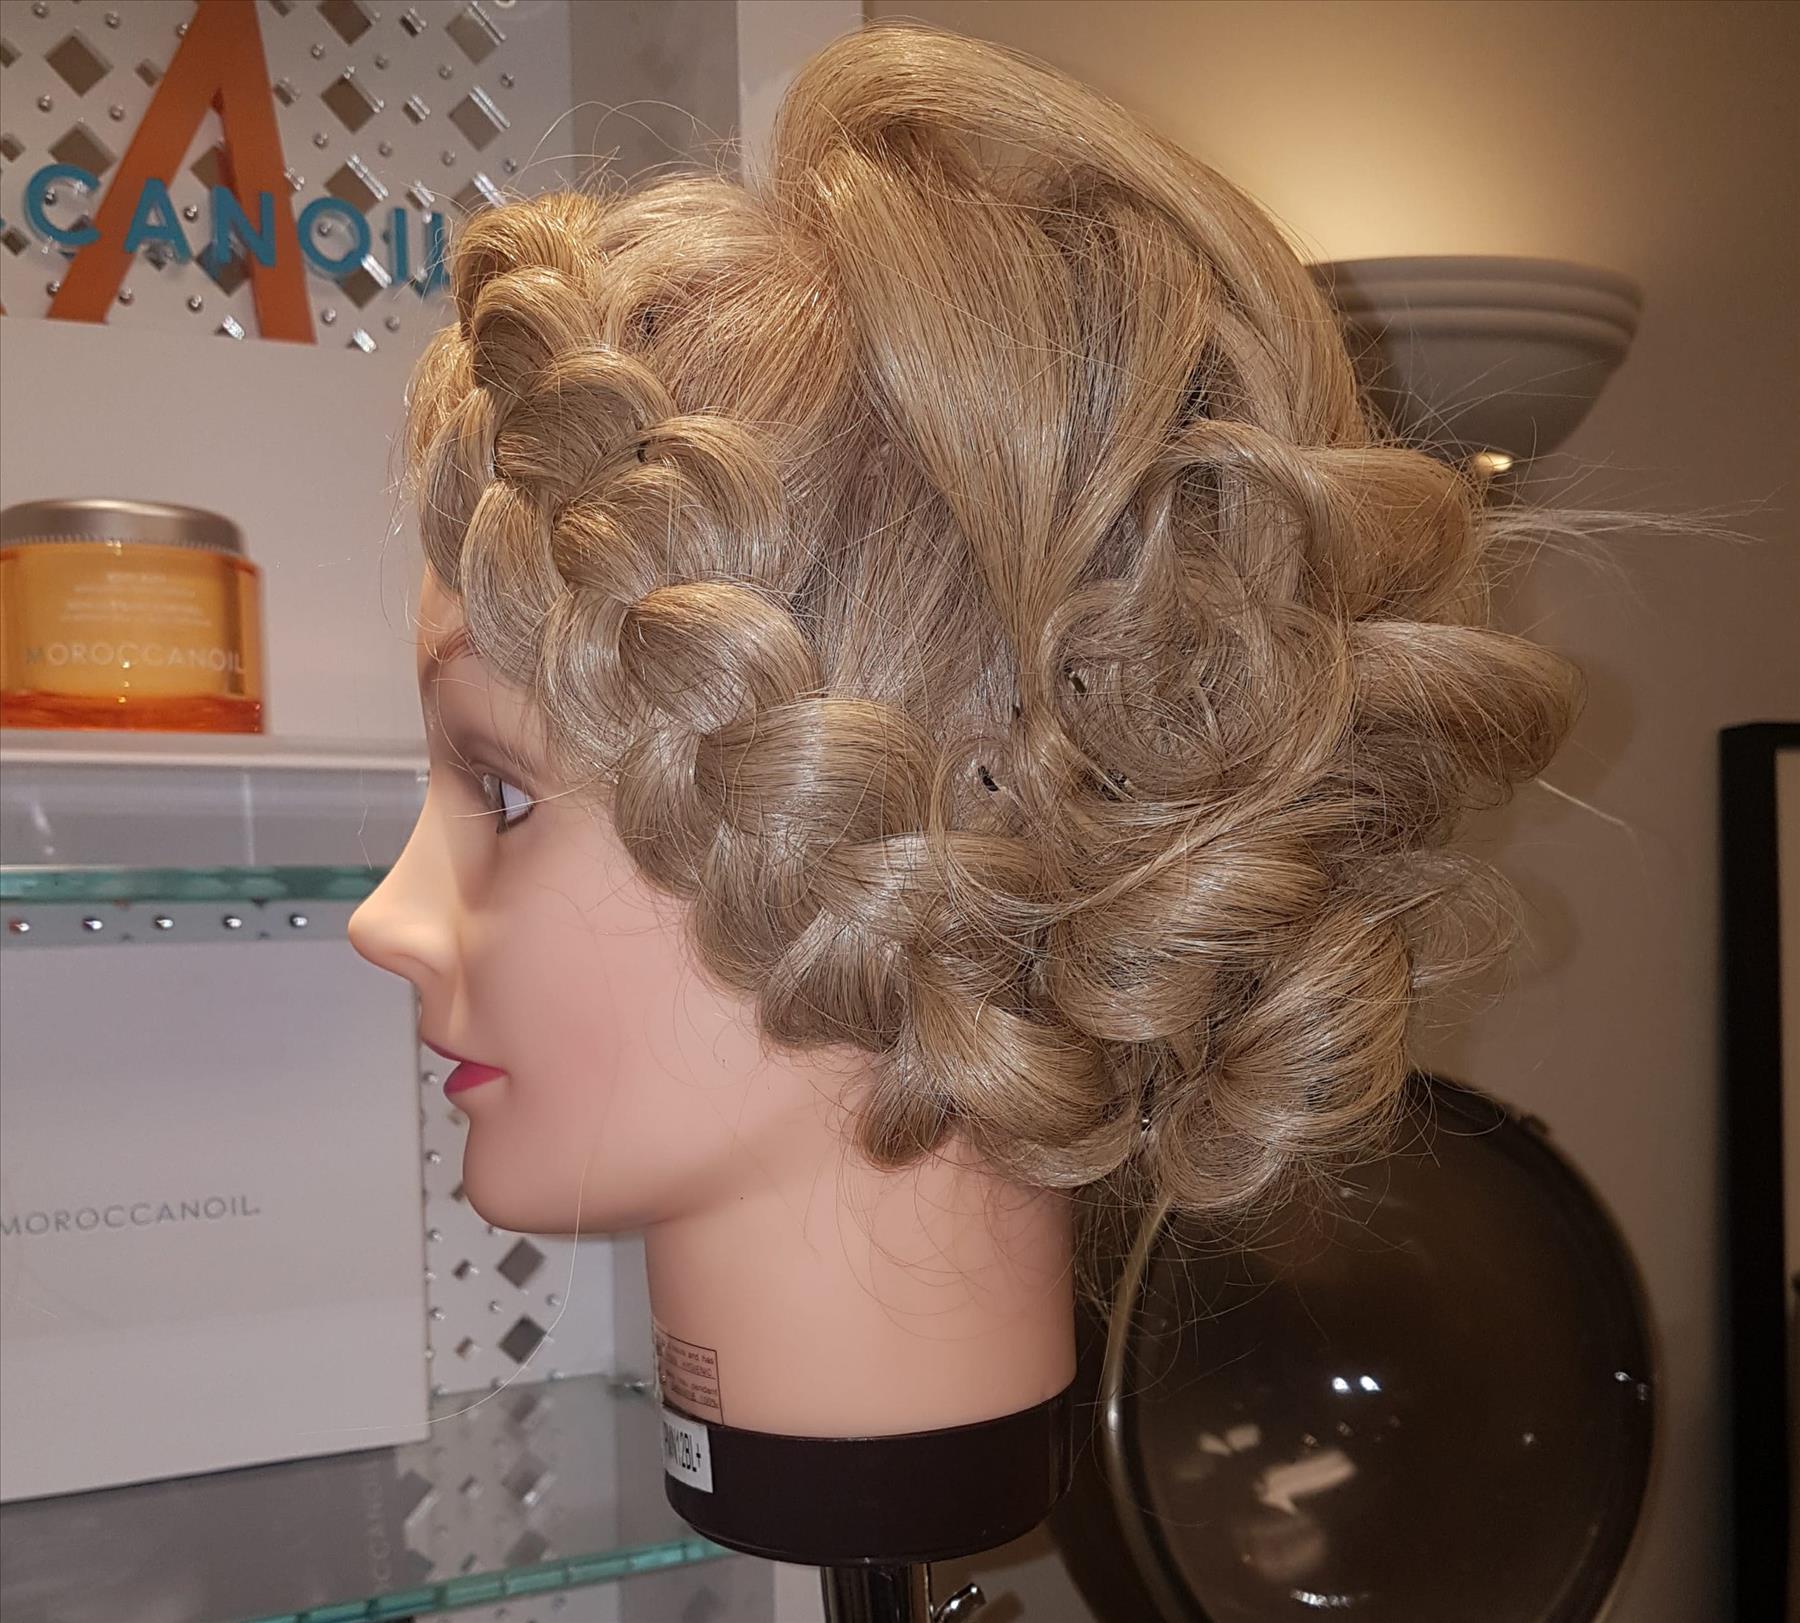 Education Series - How An Up-Do Leads to Simple Yet Stunning Style